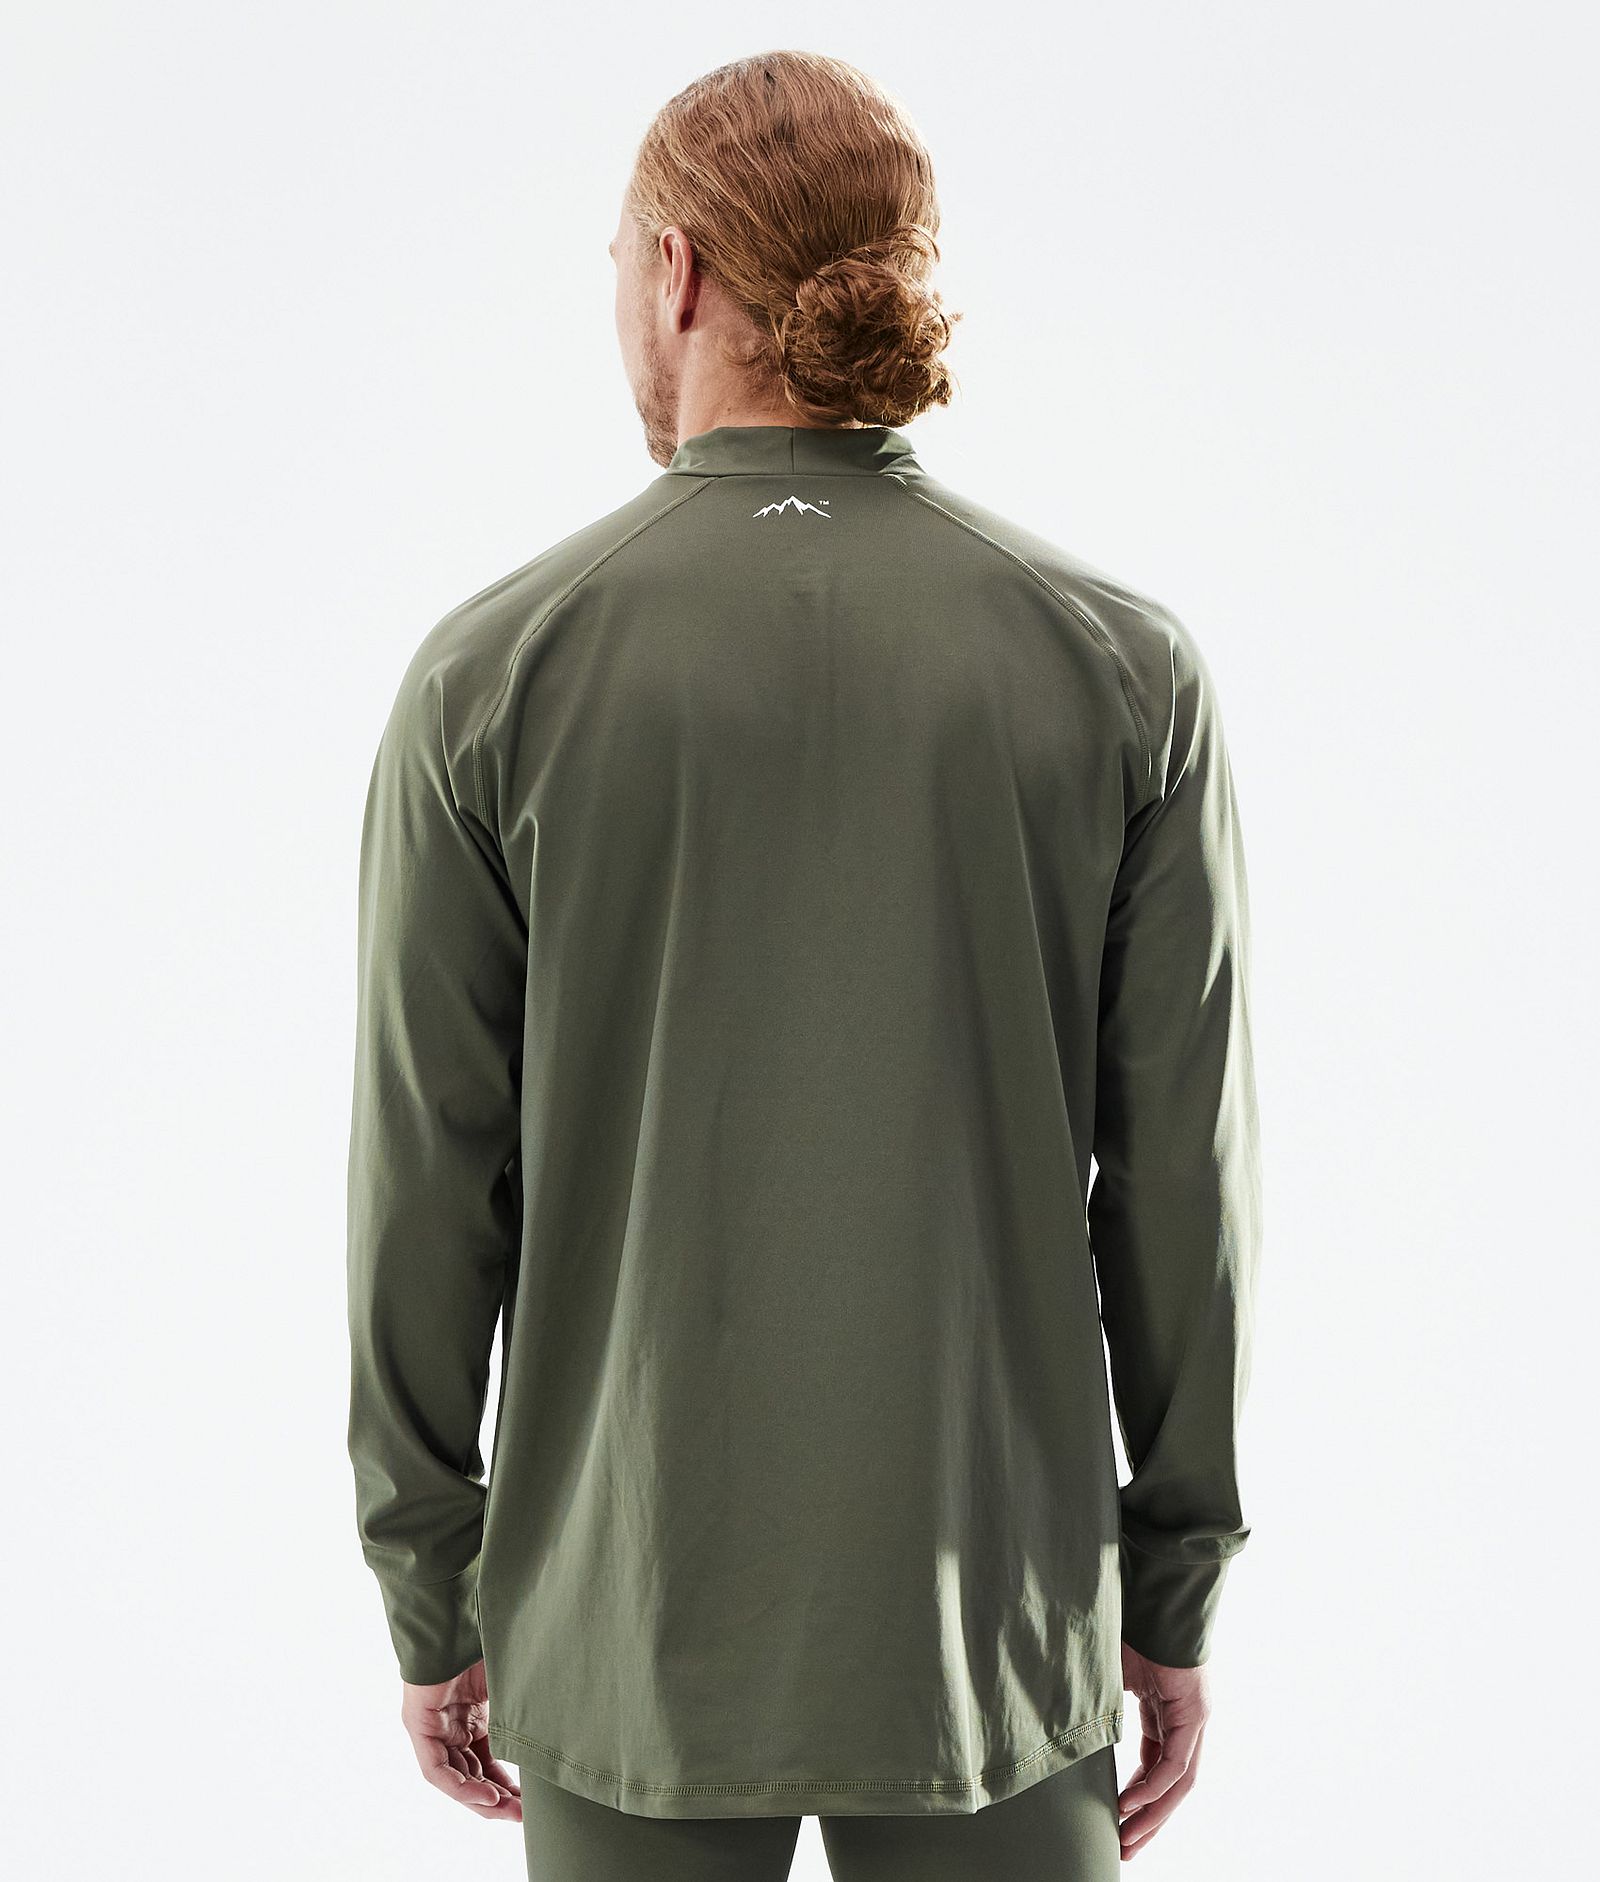 Dope Snuggle 2022 Base Layer Top Men 2X-Up Olive Green, Image 3 of 5